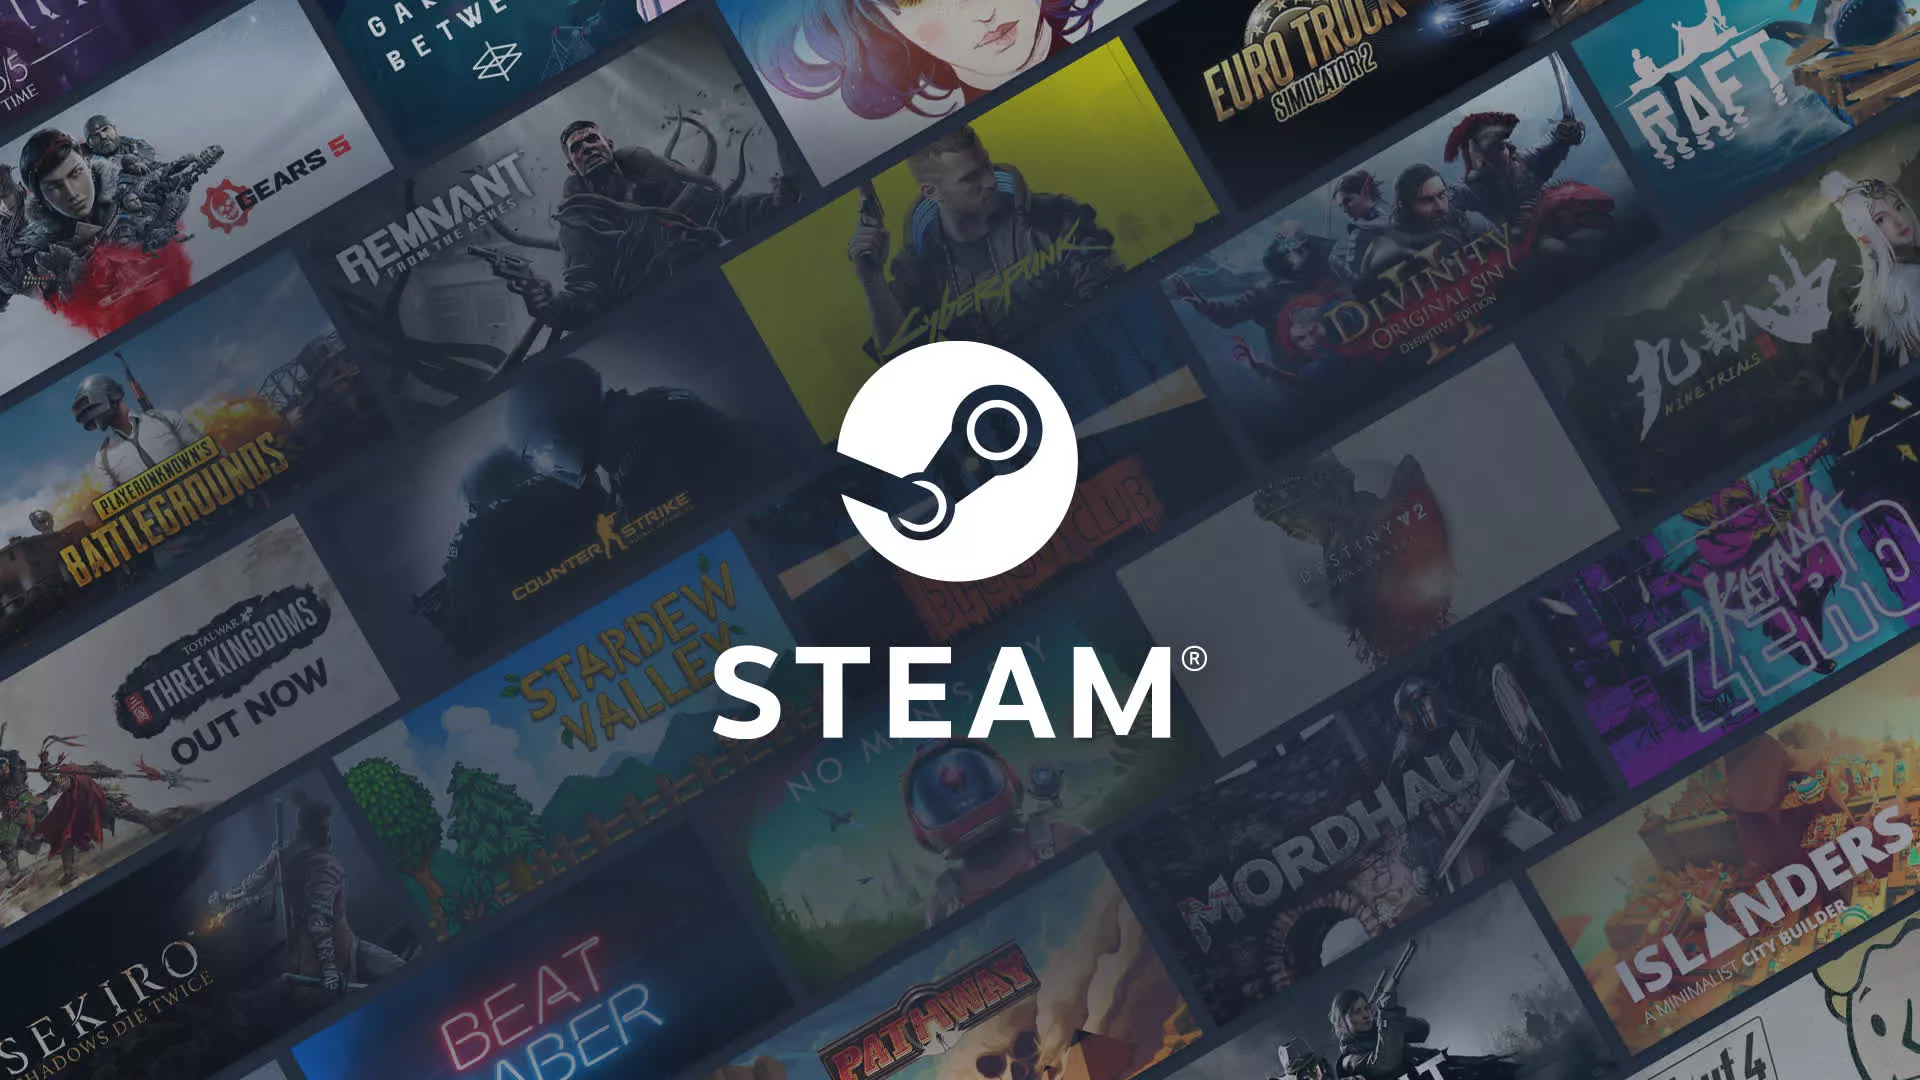 steamdb-browser-extension-now-lets-users-skip-discovery-queue-to-earn-event-trading-cards-[techspot]